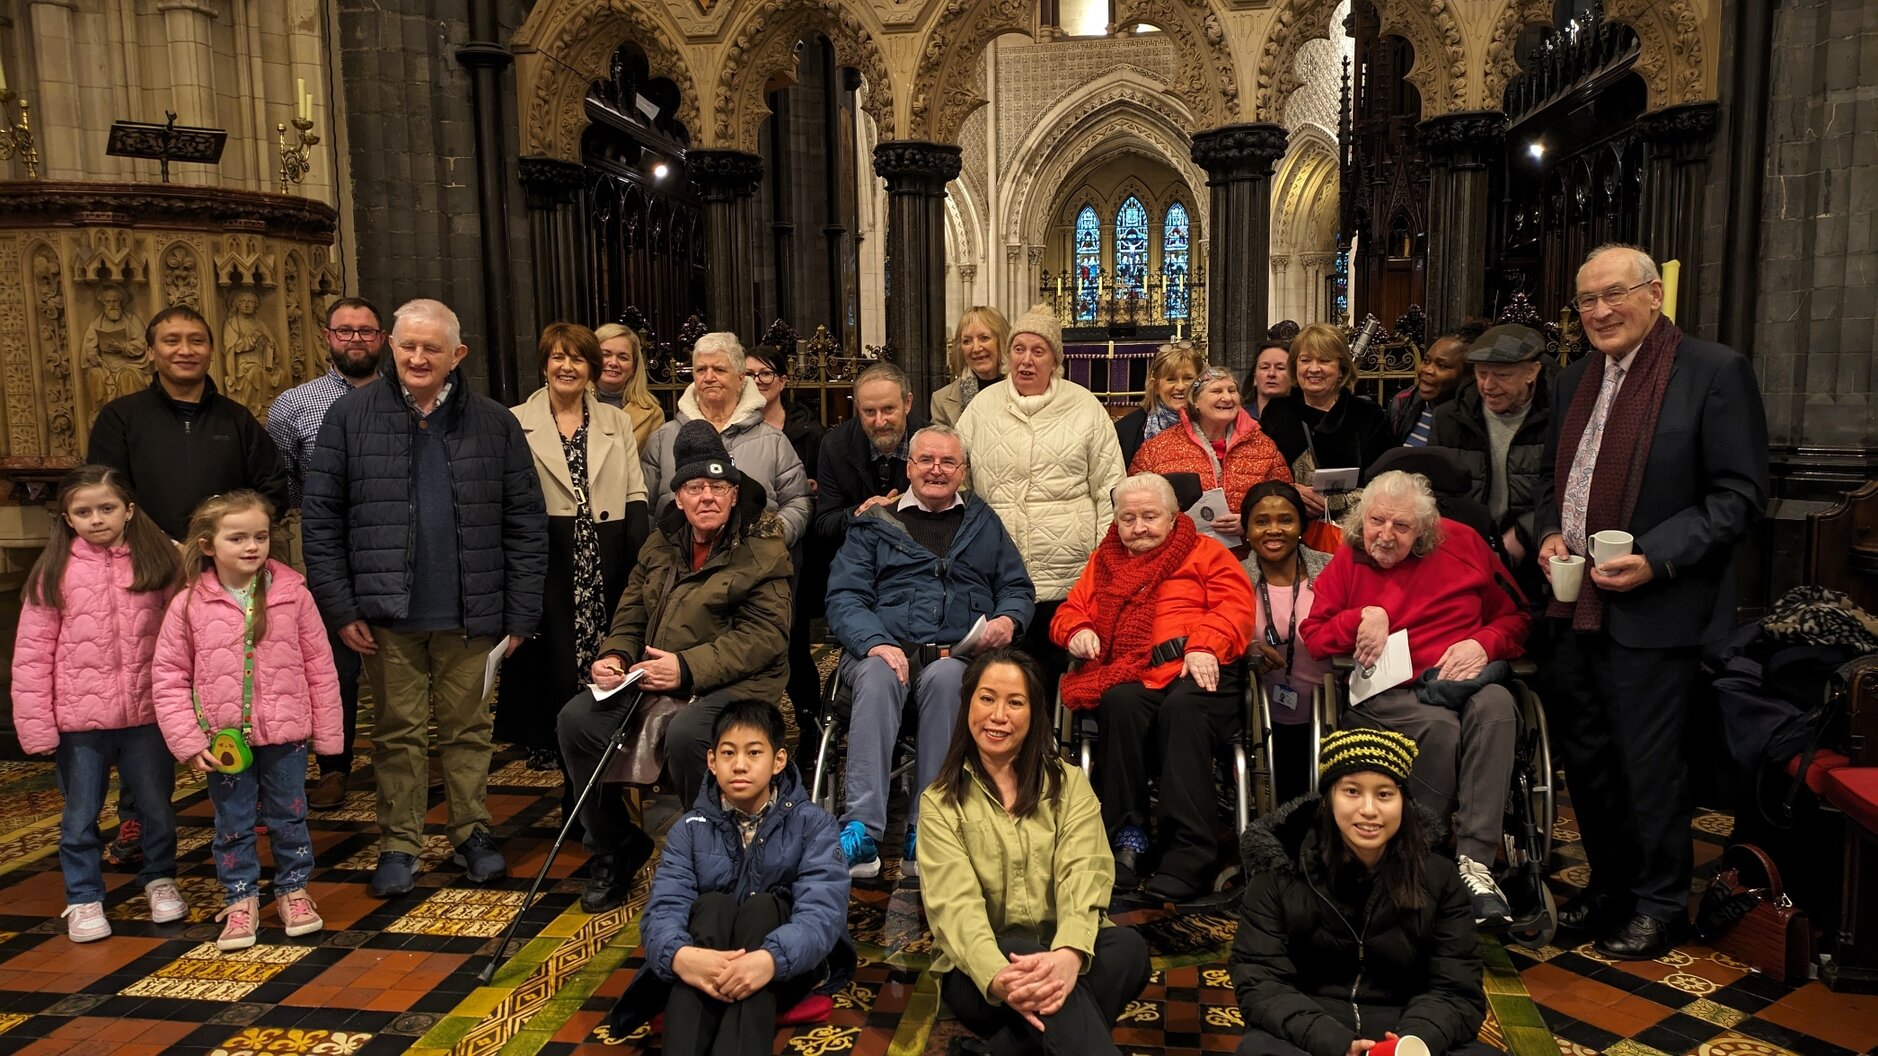 Cathedral Service Celebrates People with Intellectual Disabilities